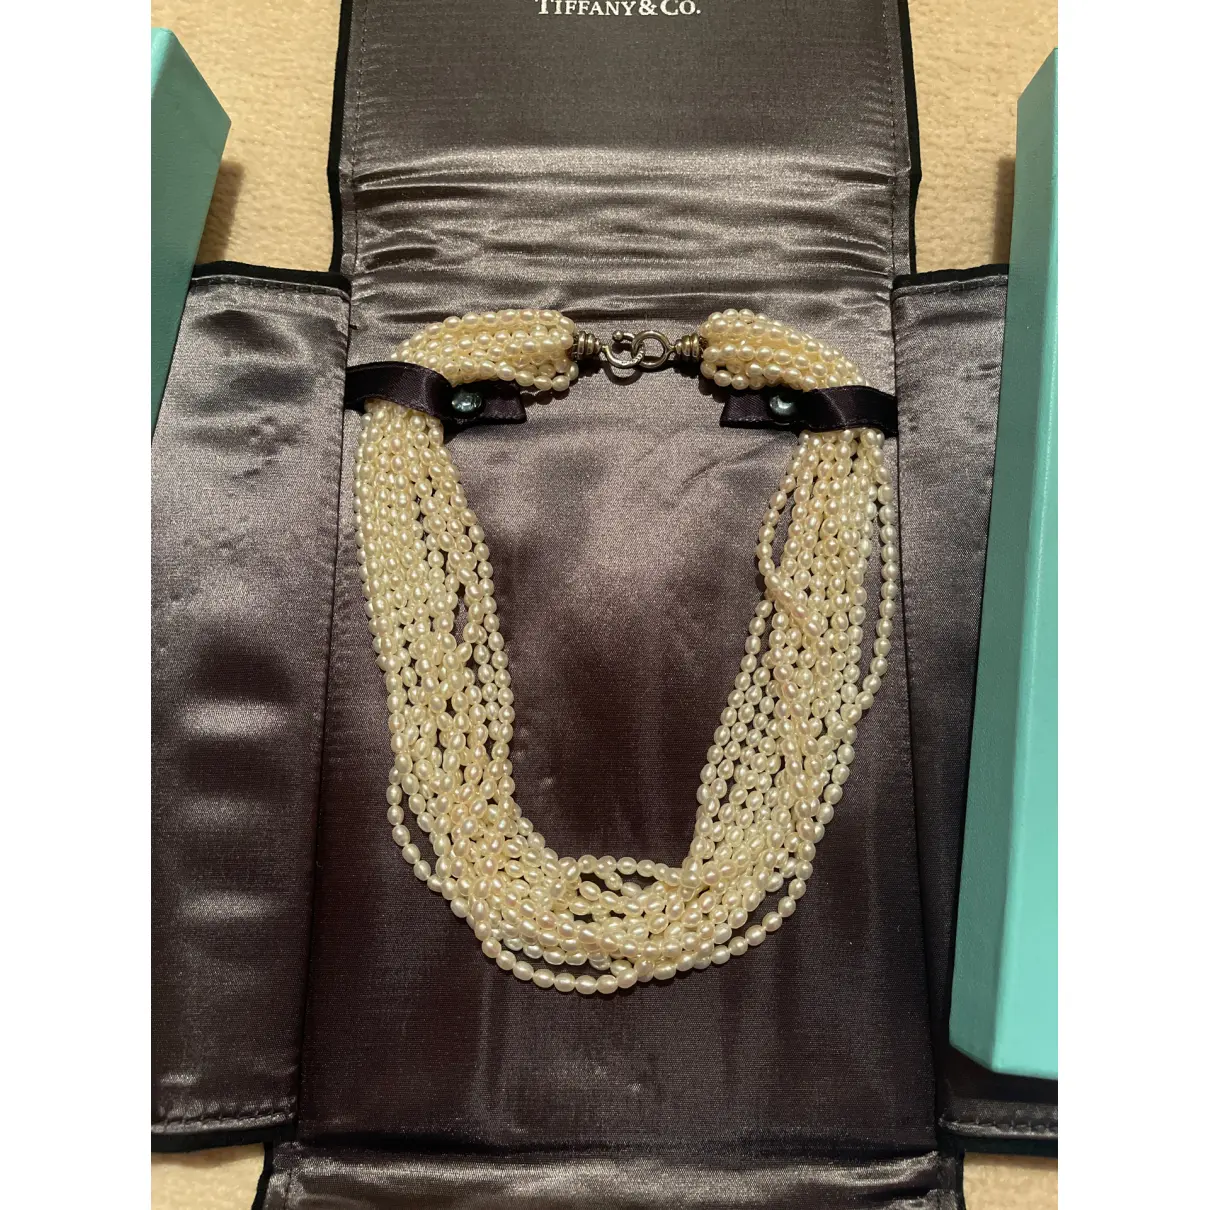 Paloma Picasso pearl necklace Tiffany & Co - Vintage